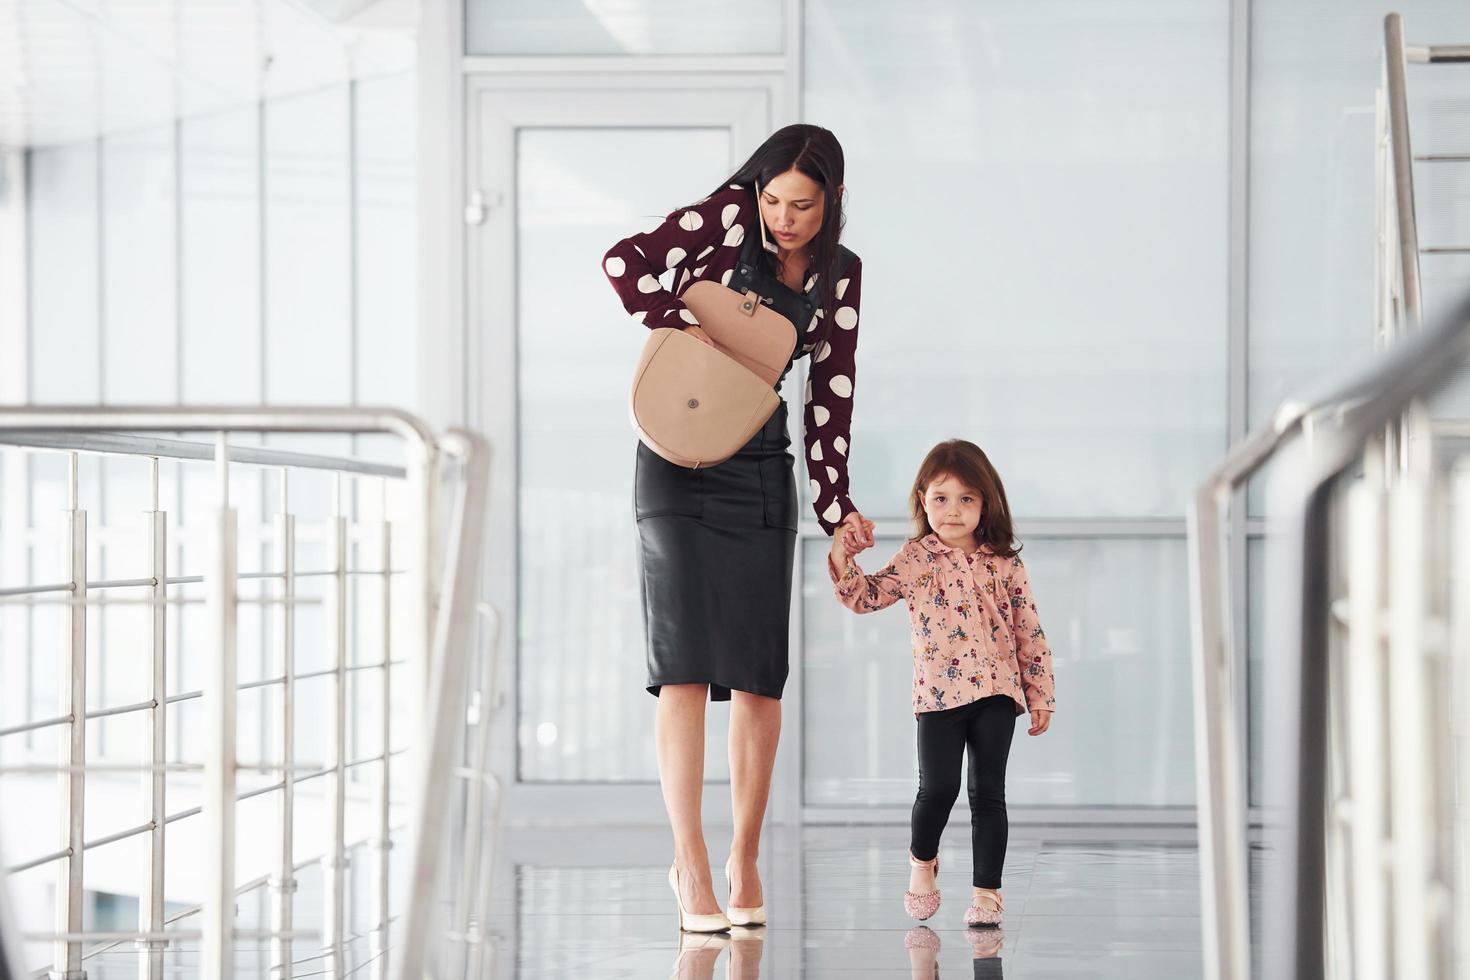 Young mother with her daughter walking together indoors in the office or airport. Having vacation photo